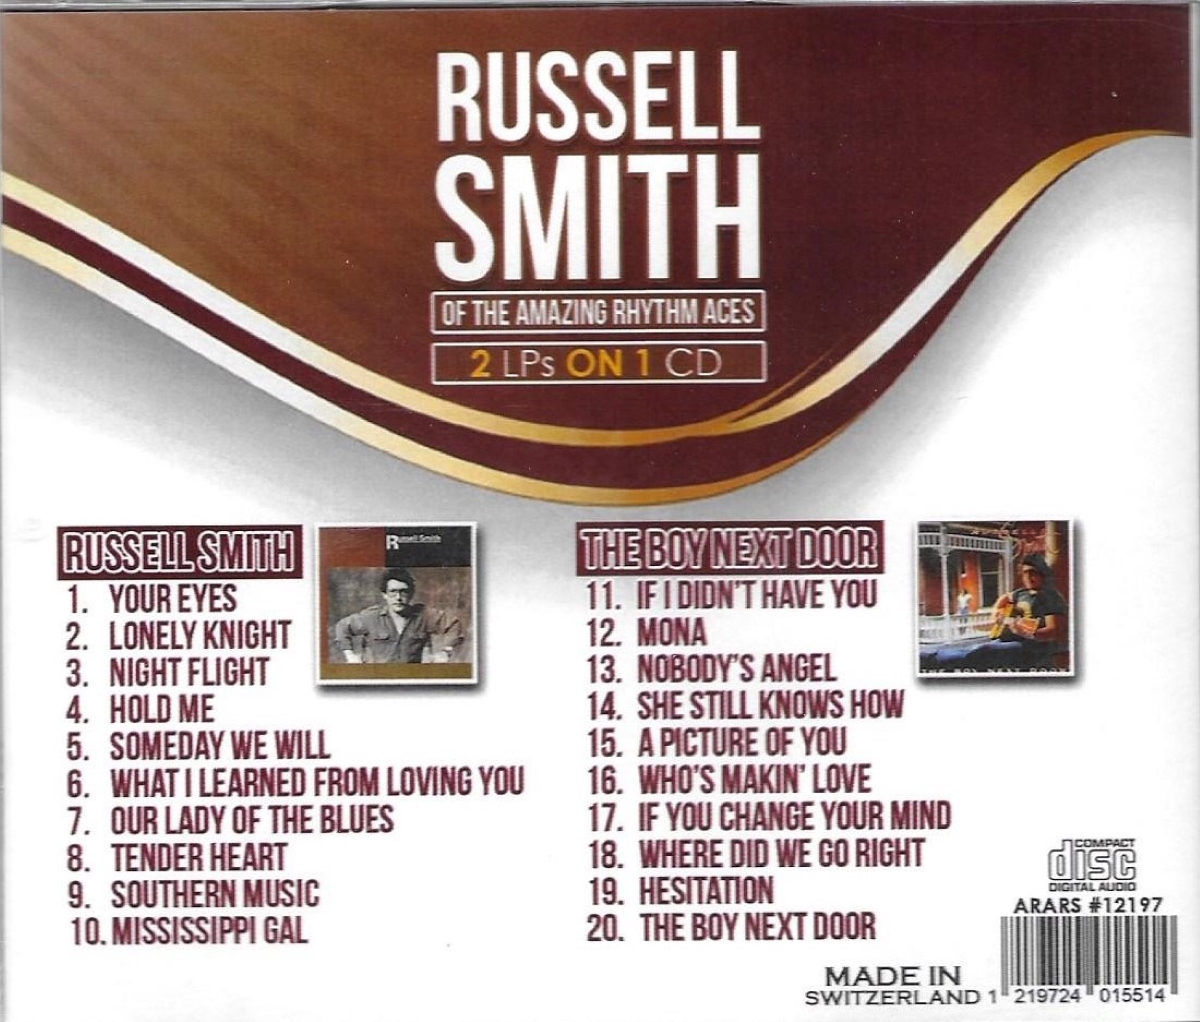 2 LPs on 1 CD-Russell Smith / The Boy Next Door